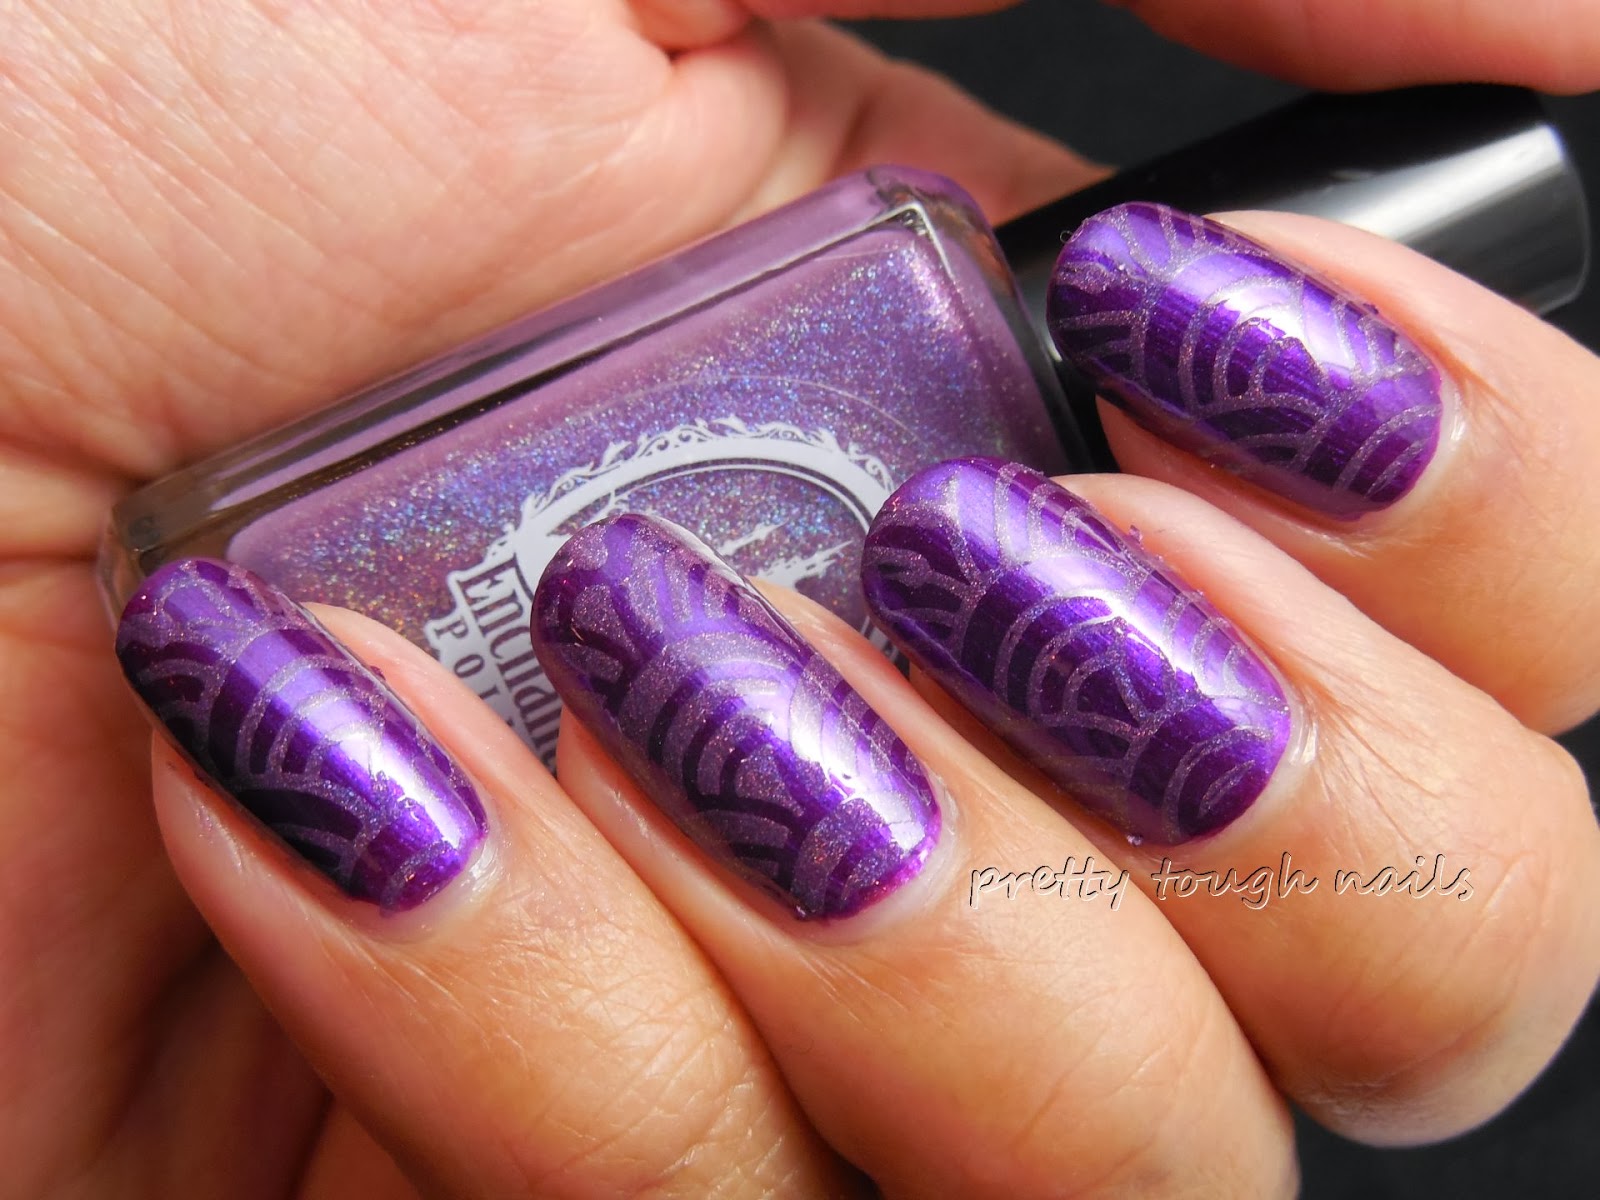 Butter London HRH Stamped With Enchanted Polish Mercy